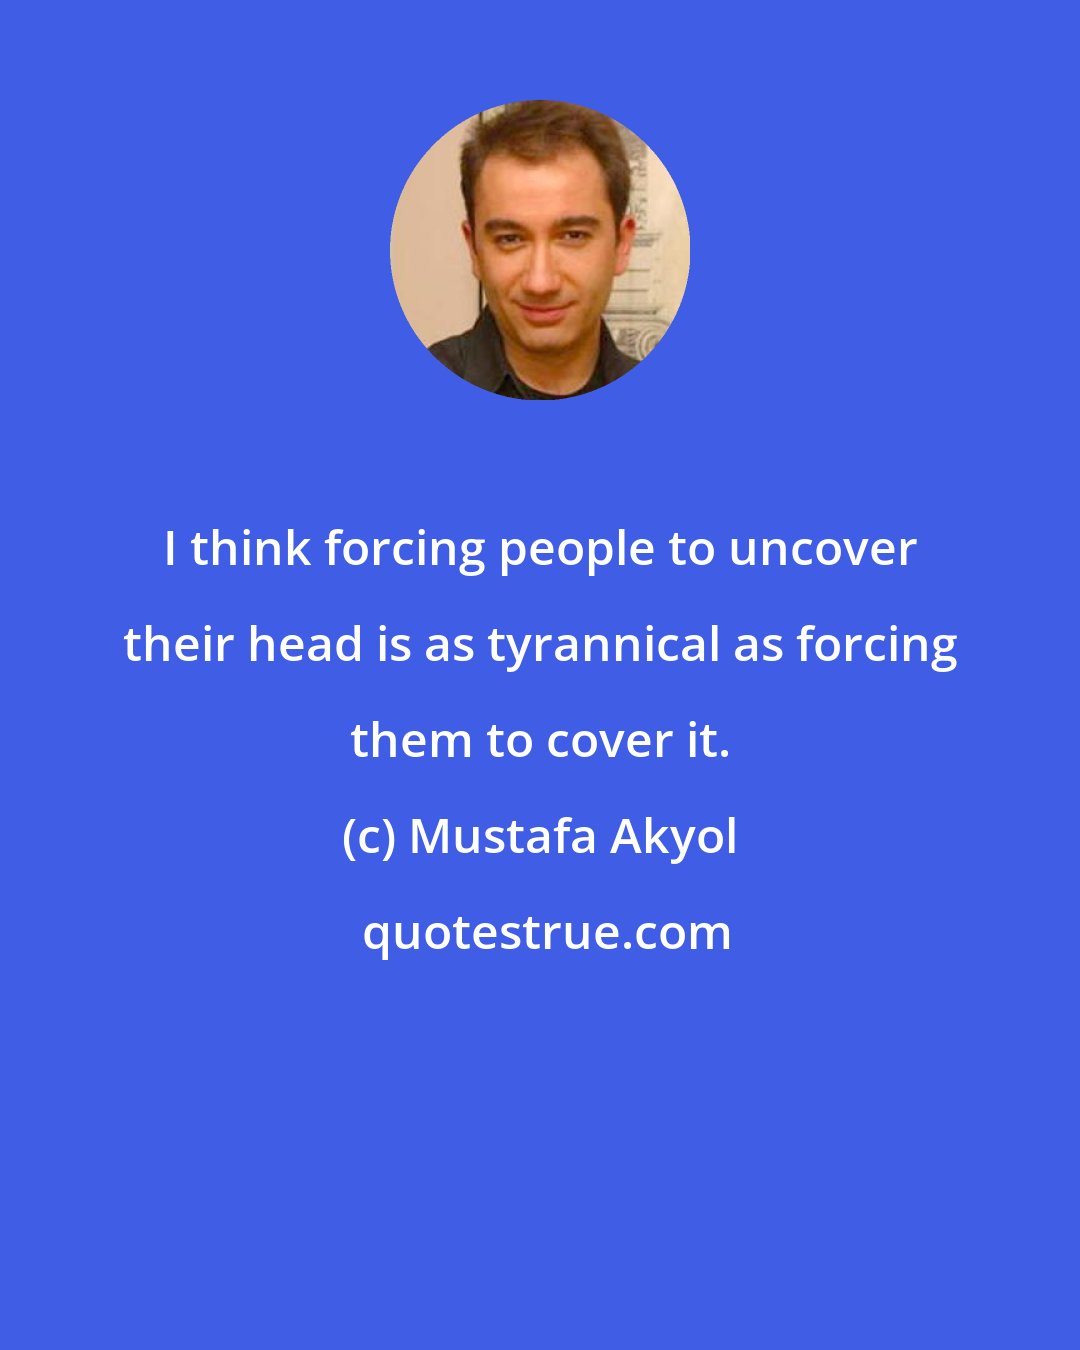 Mustafa Akyol: I think forcing people to uncover their head is as tyrannical as forcing them to cover it.